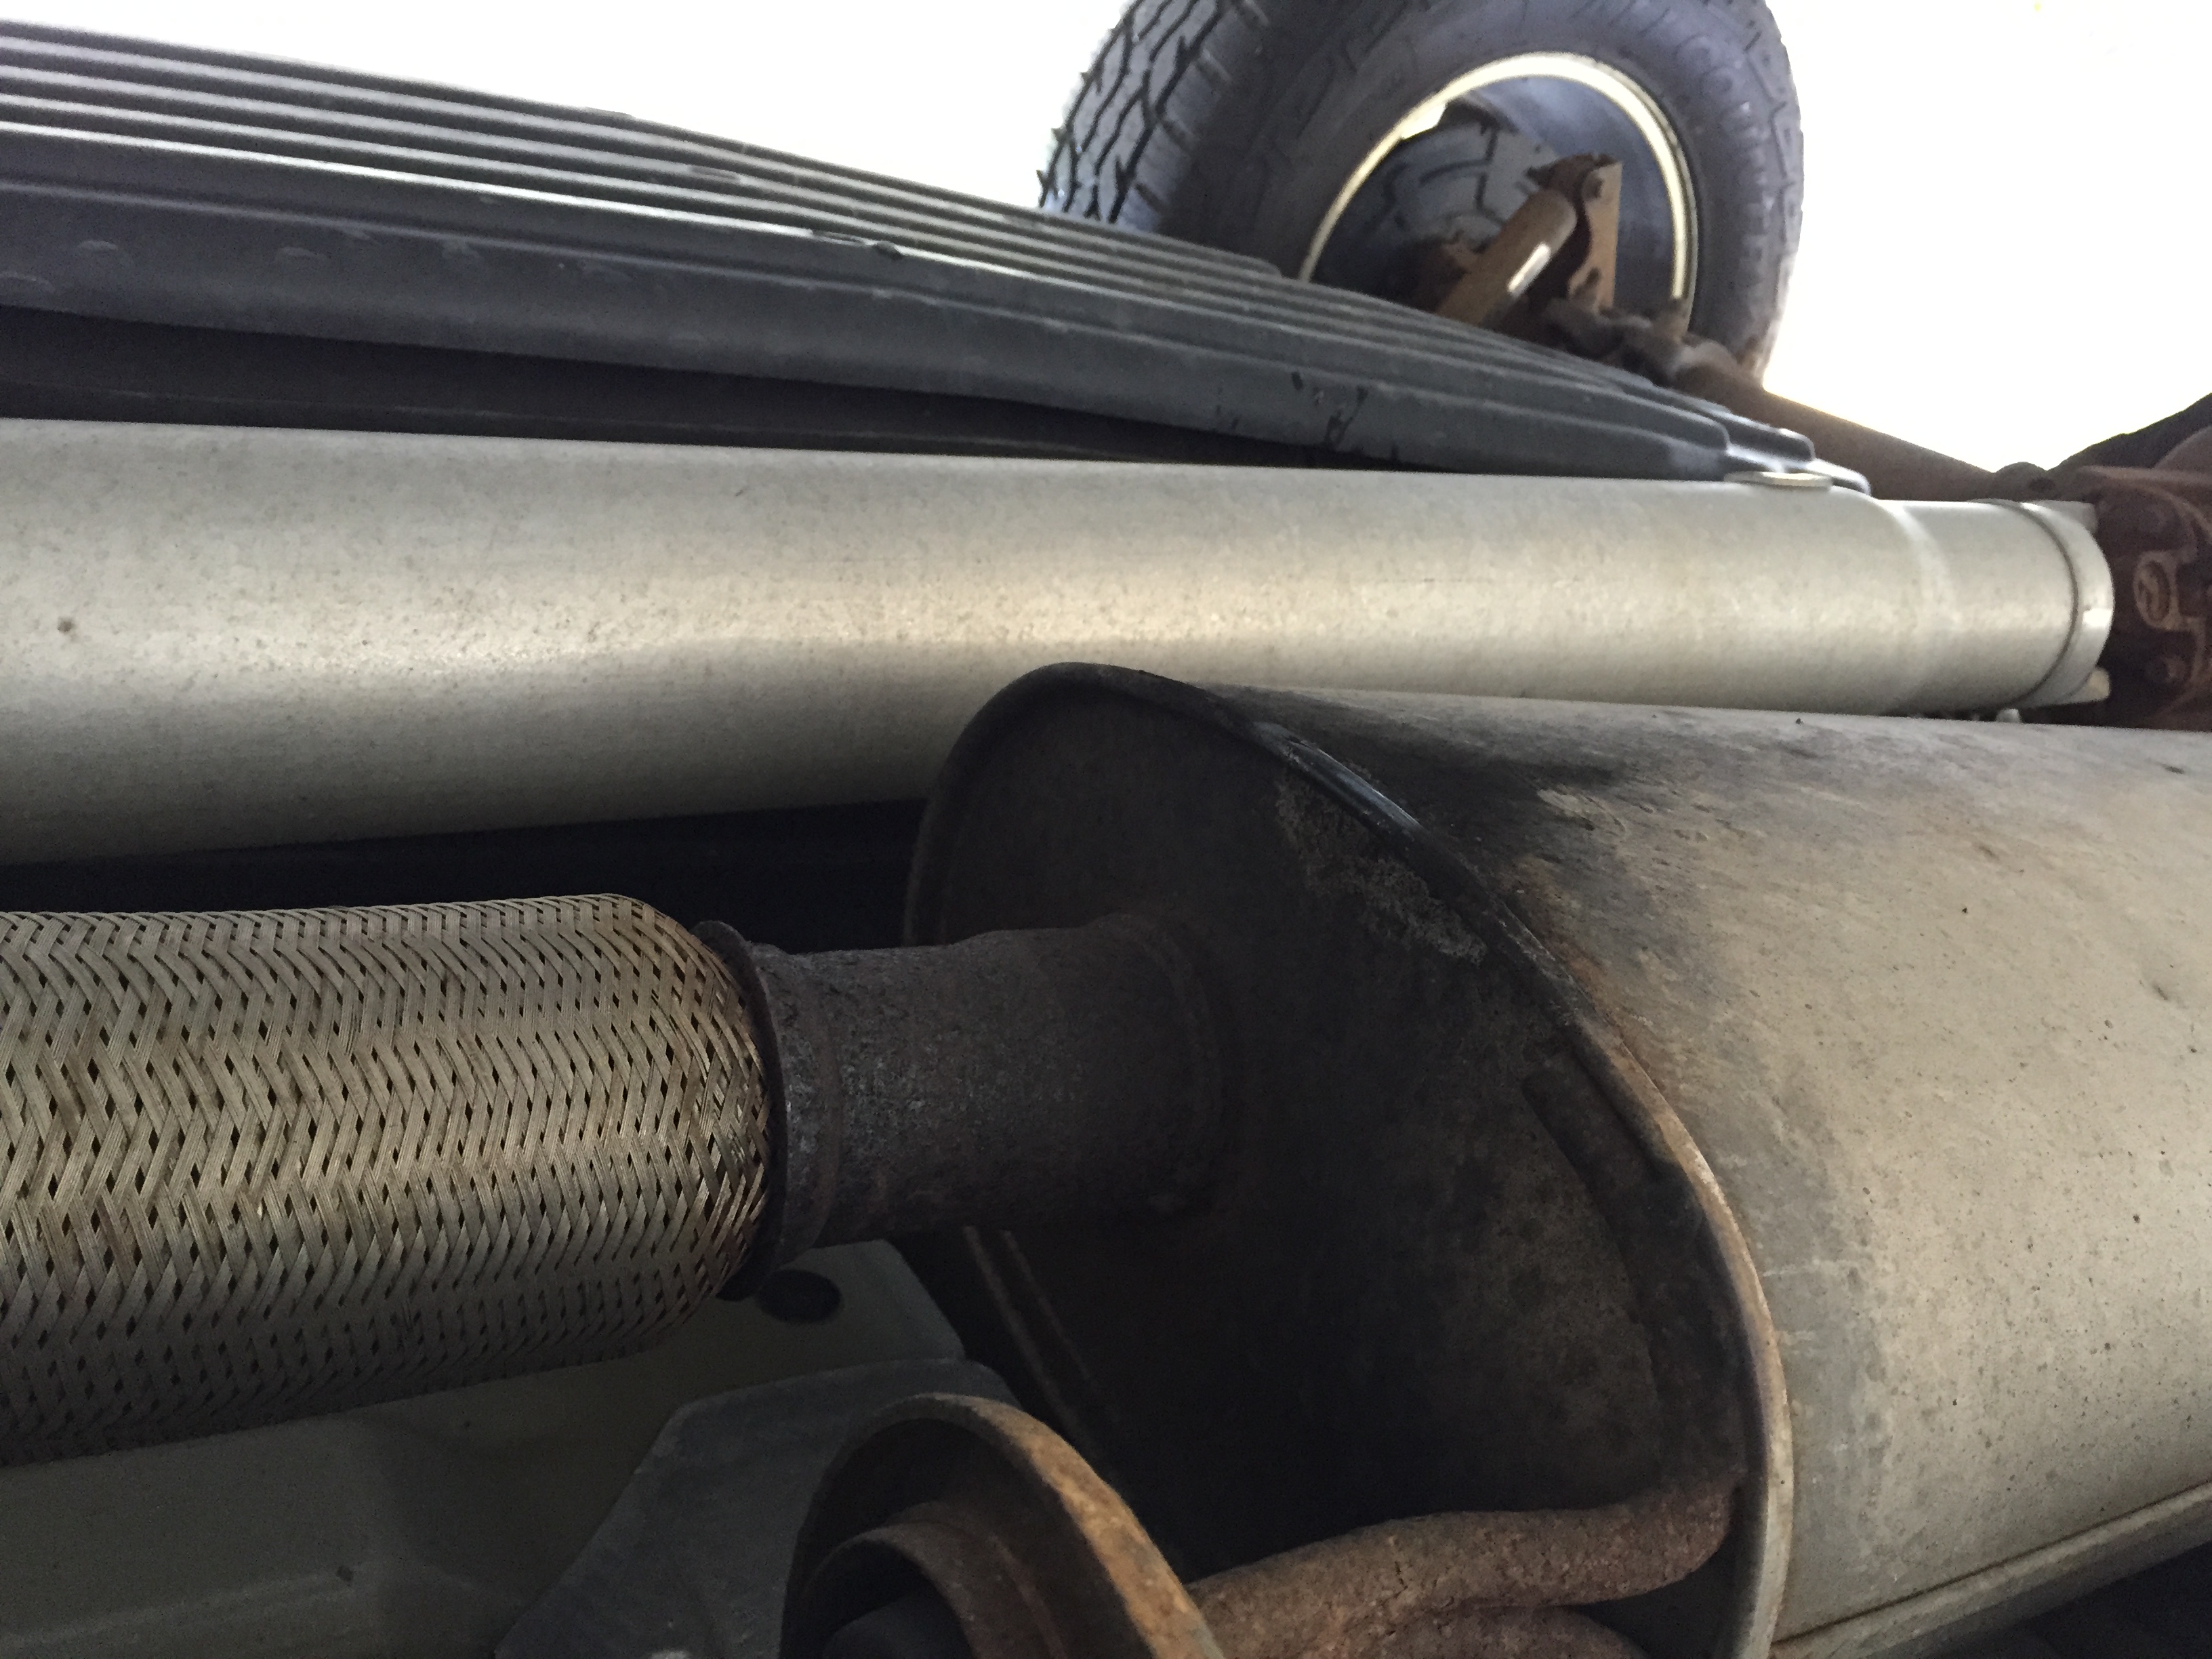 2013 EB exhaust leak, maybe??? - Ford F150 Forum - Community of Ford